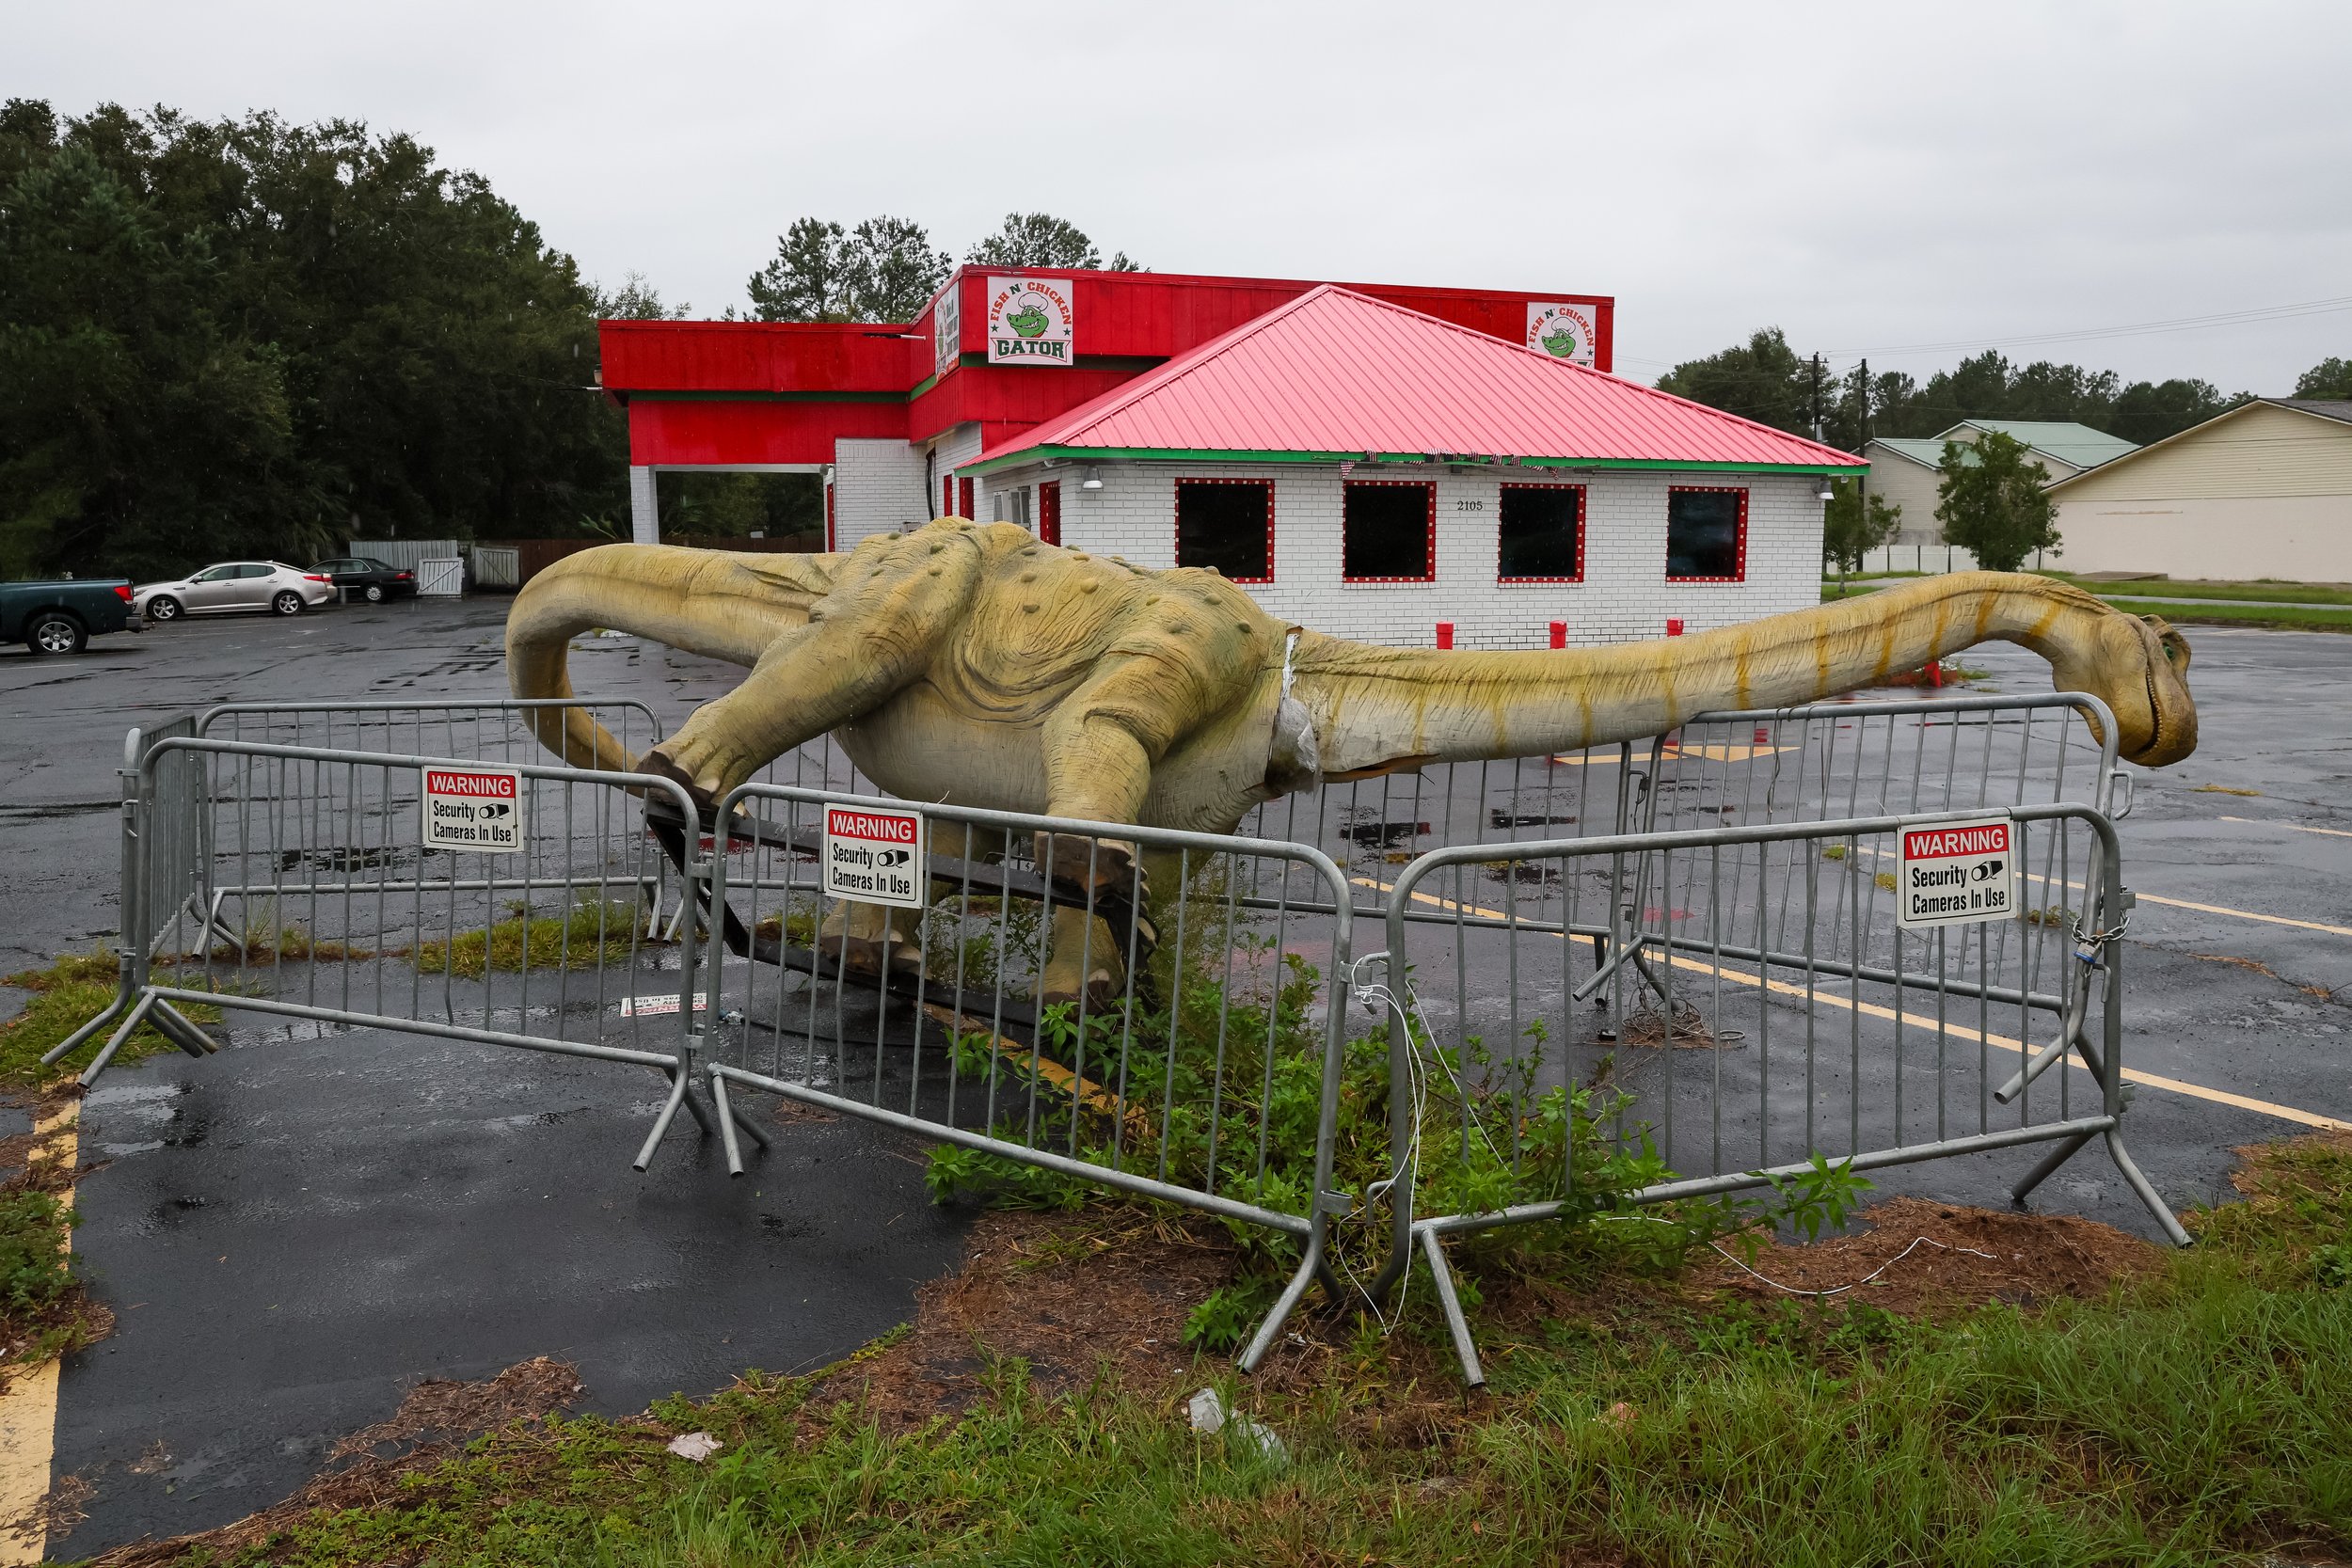  A fallen dinosaur statue is seen in St. Marys, Georgia on Thursday, September 29, 2022 as tropical storm Ian makes its way north from Florida. 